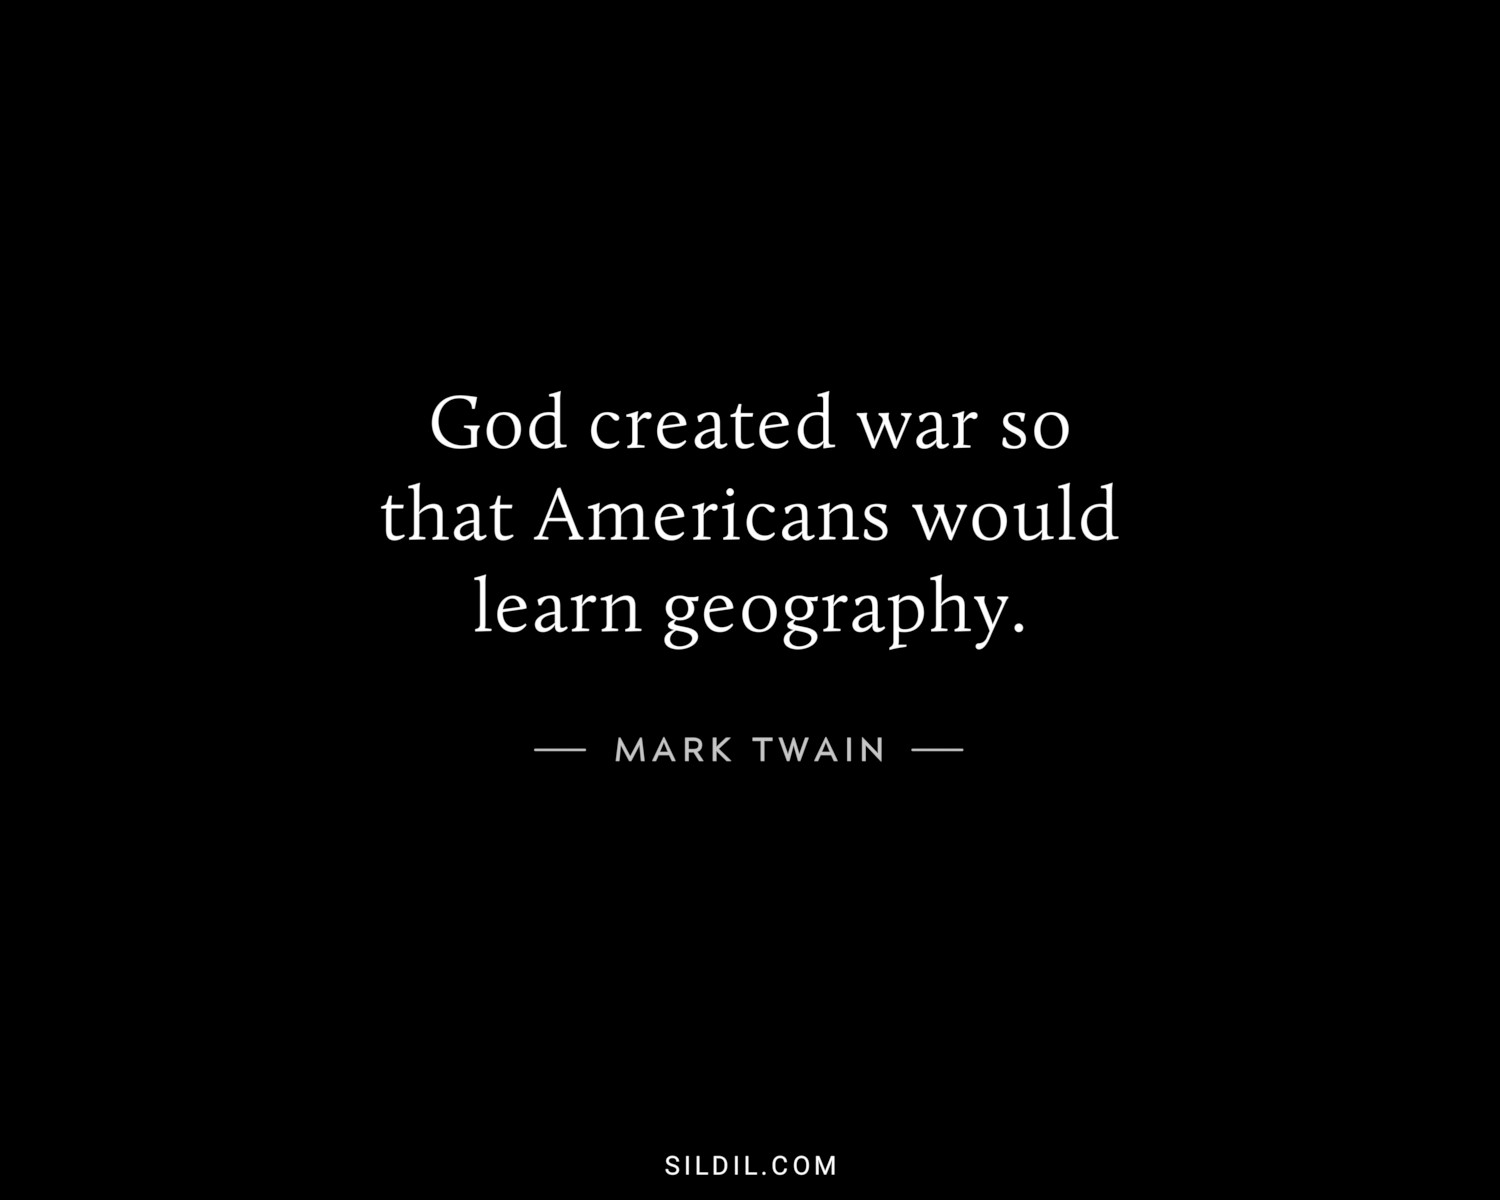 God created war so that Americans would learn geography.